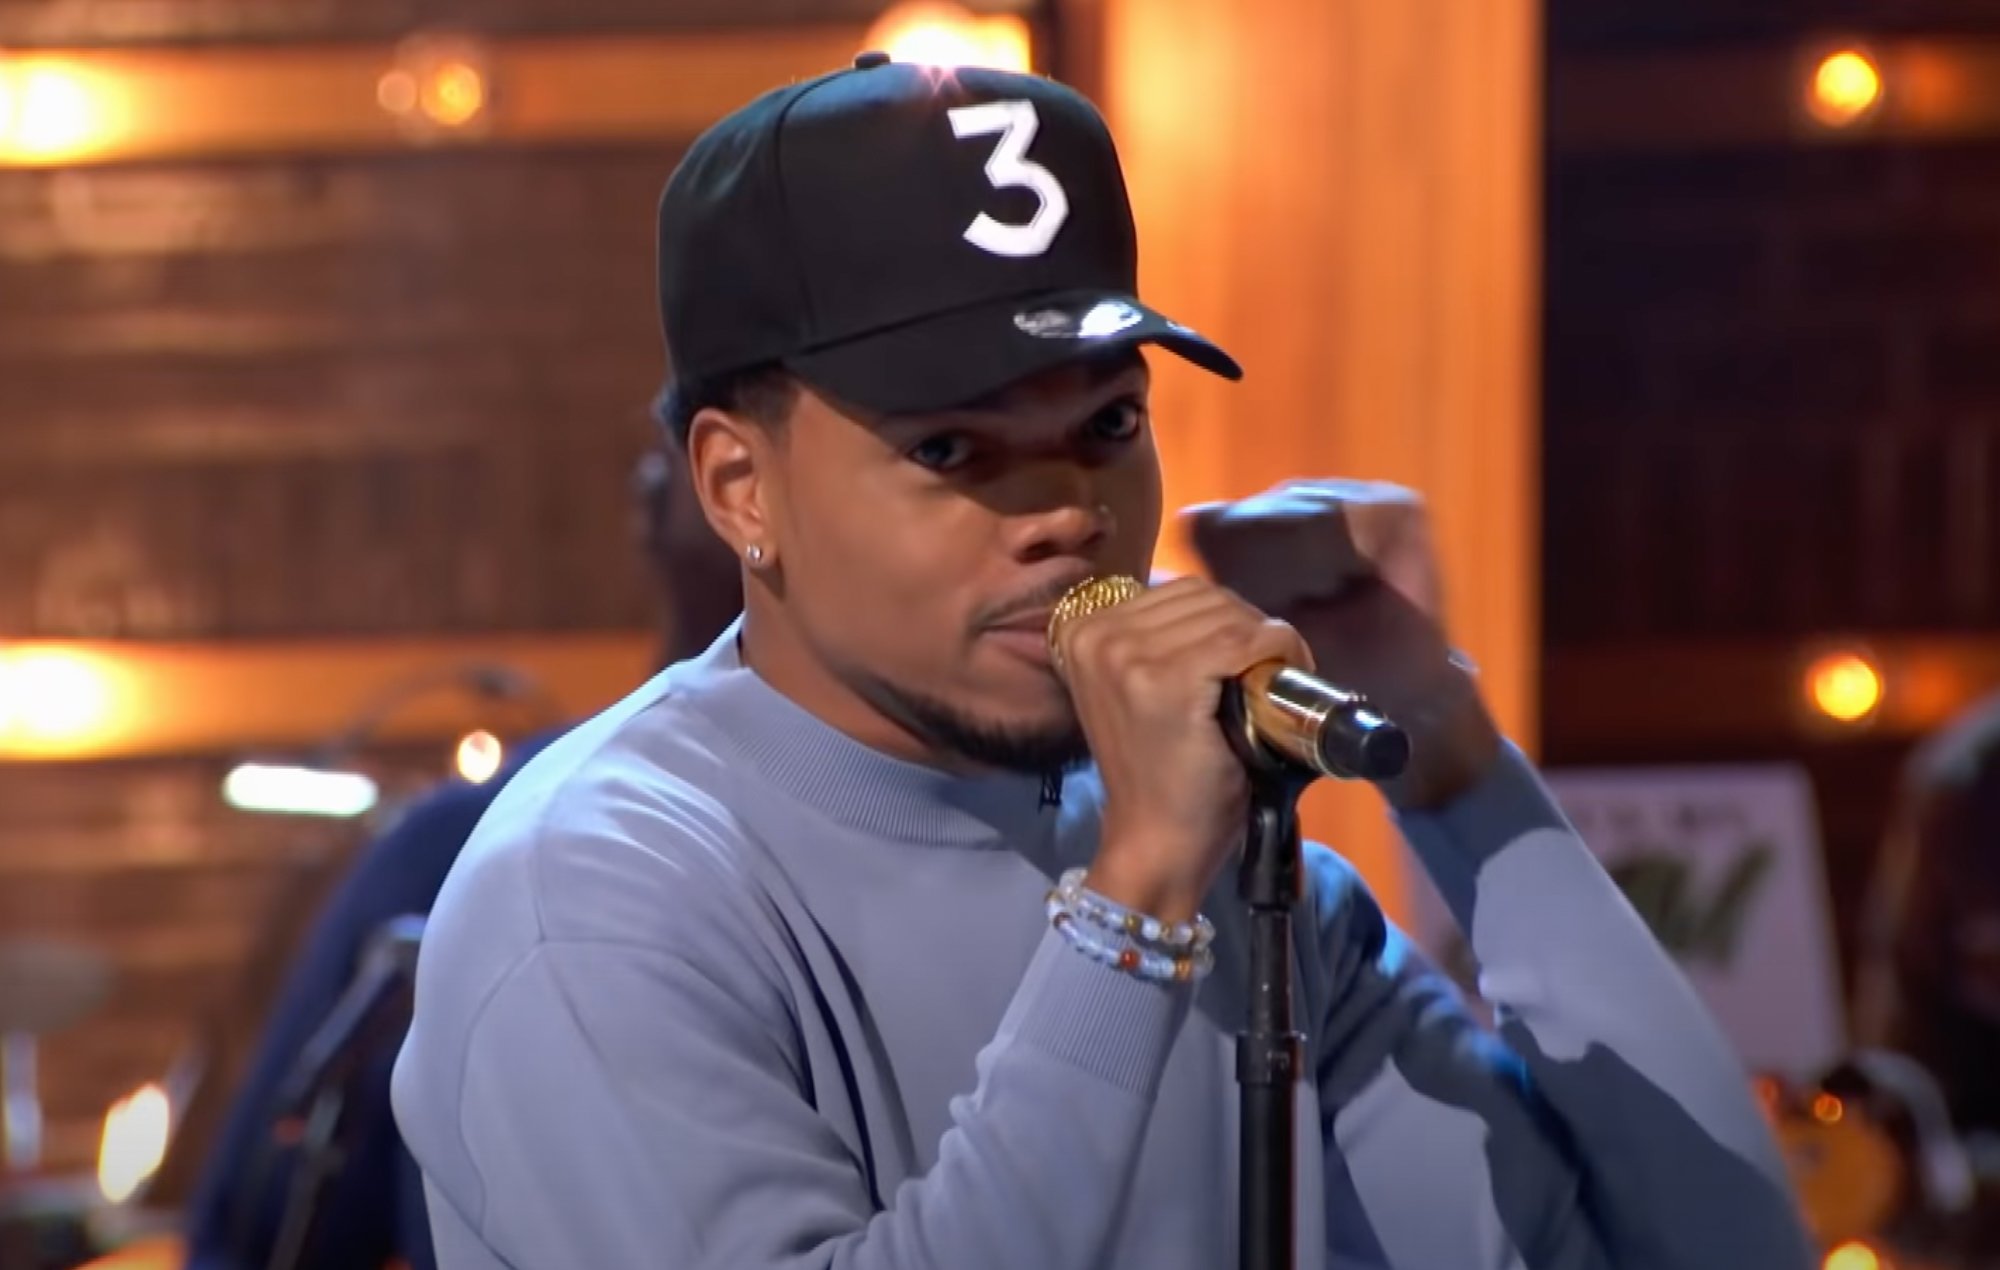 Chance the Rapper Transforms Nelly's "Hot in Herre" Into a Country-Rock Hit